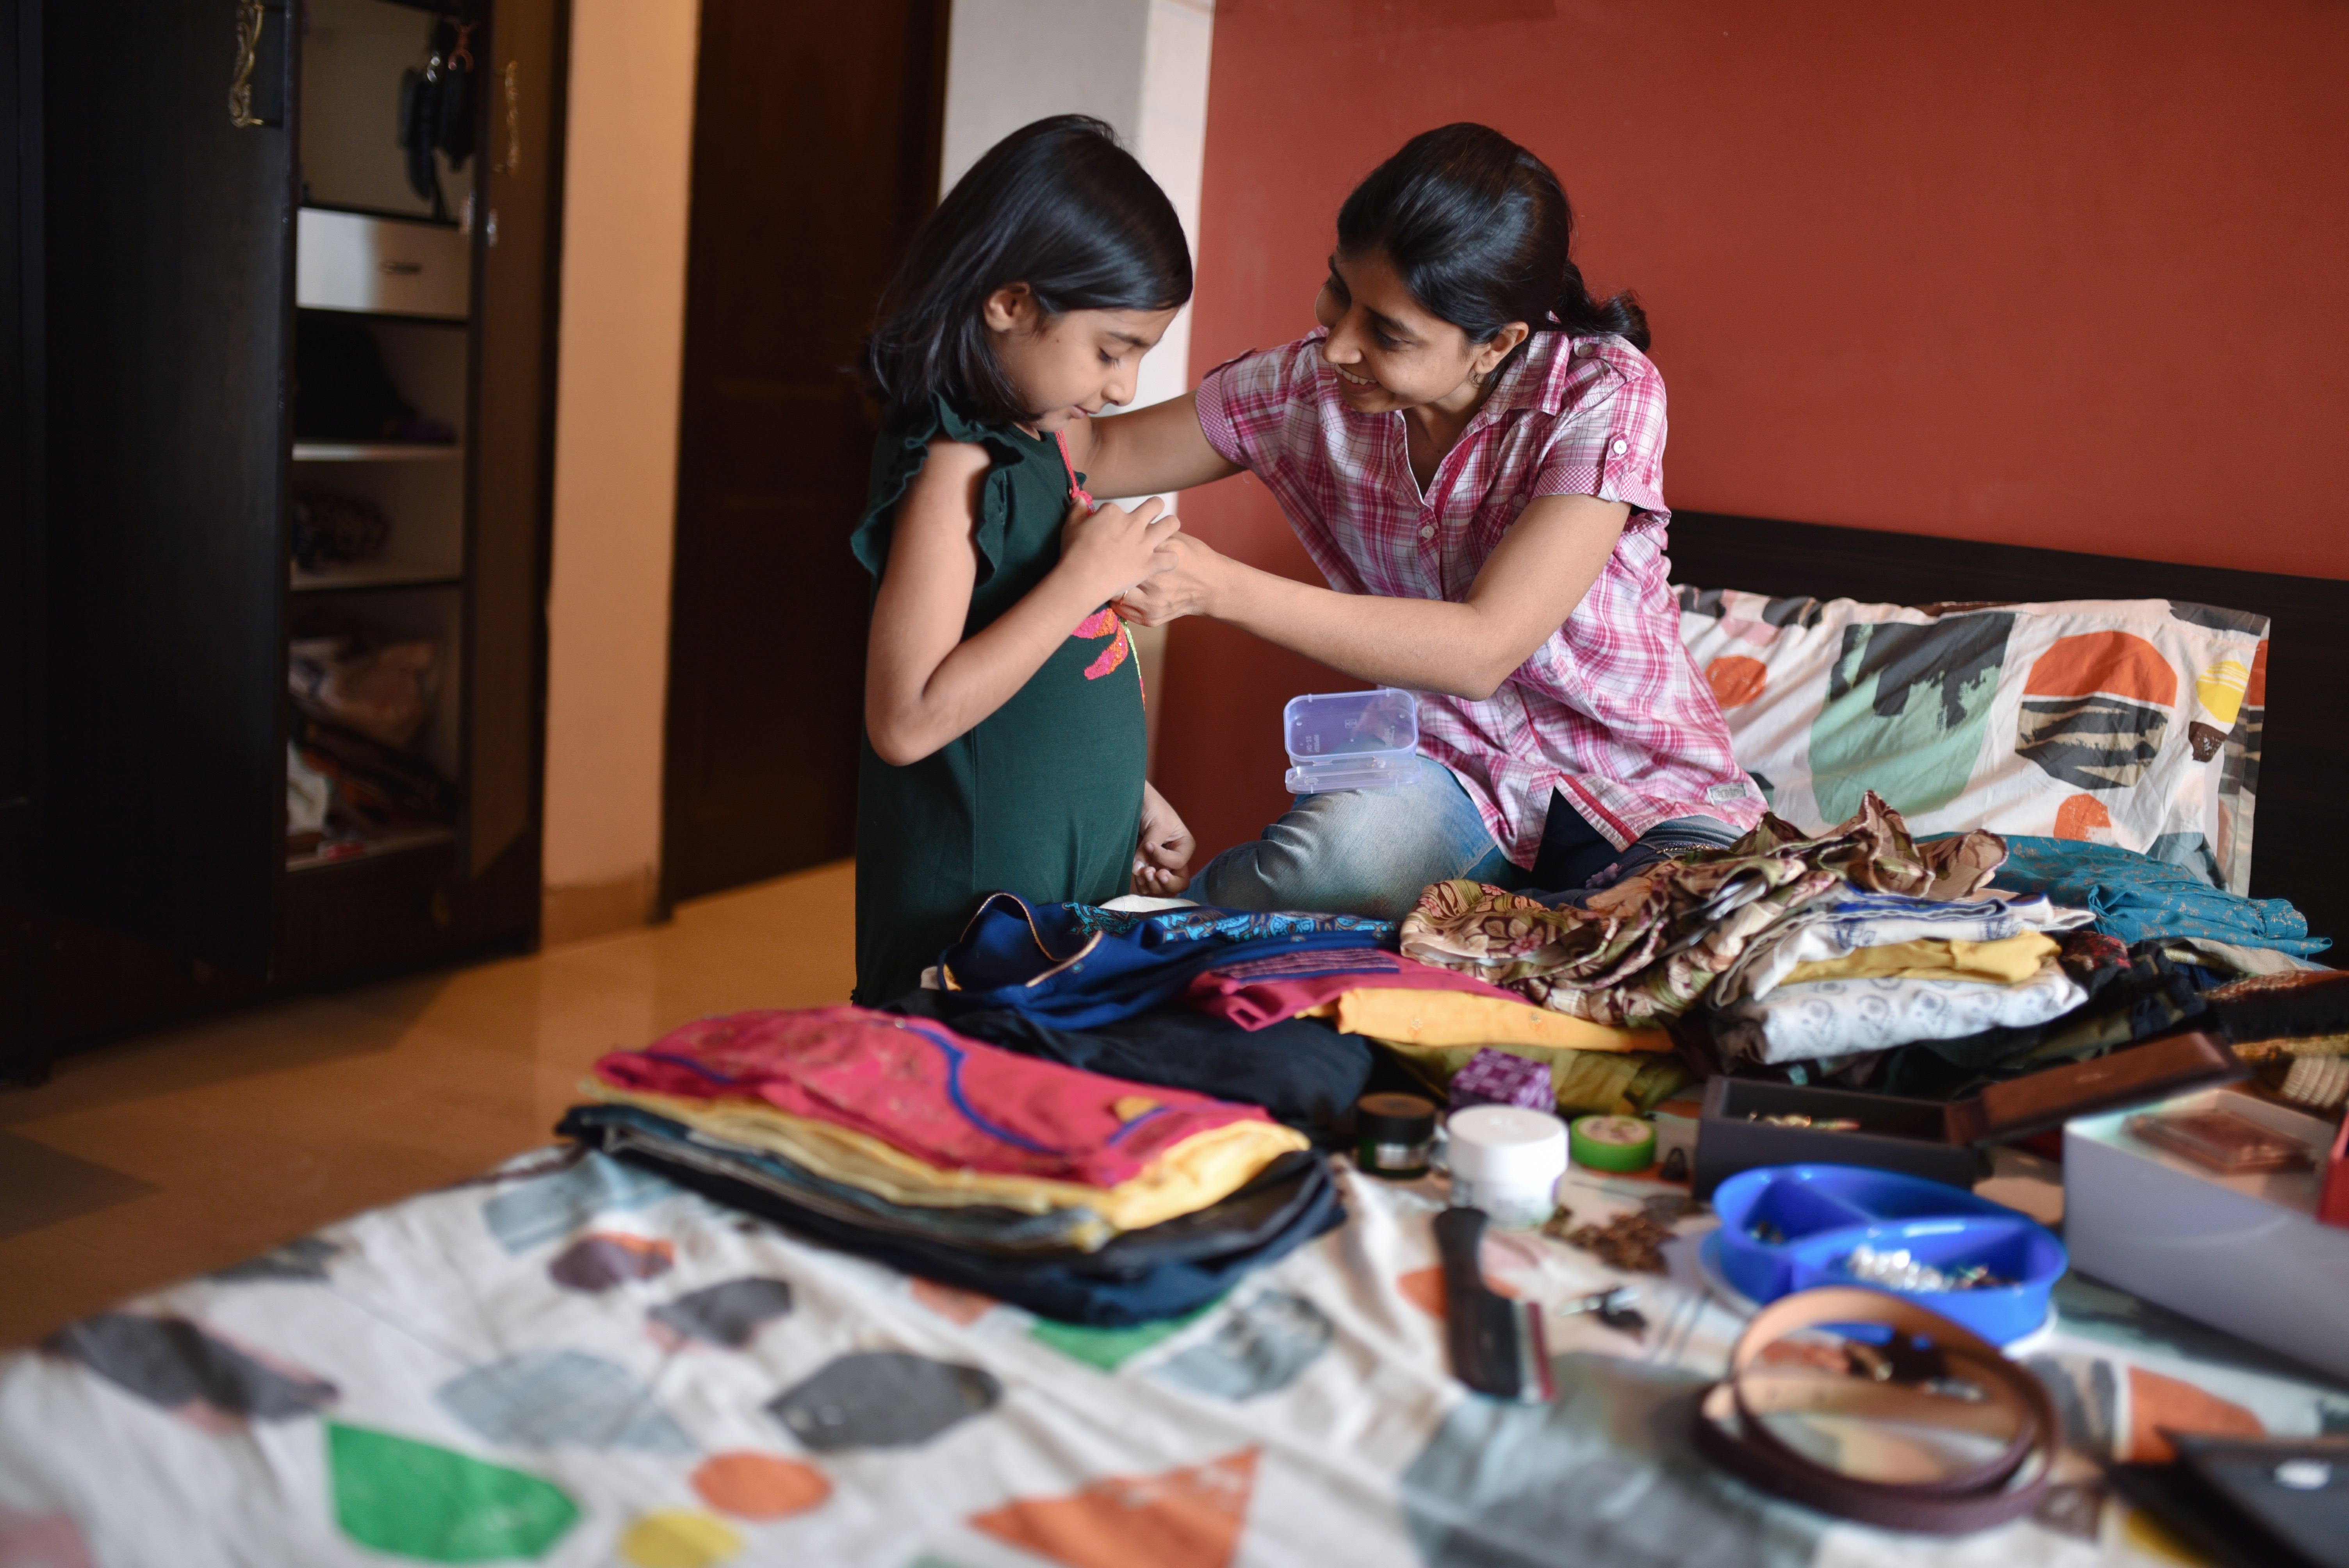 Young girl and adult woman sort clothes in bedroom